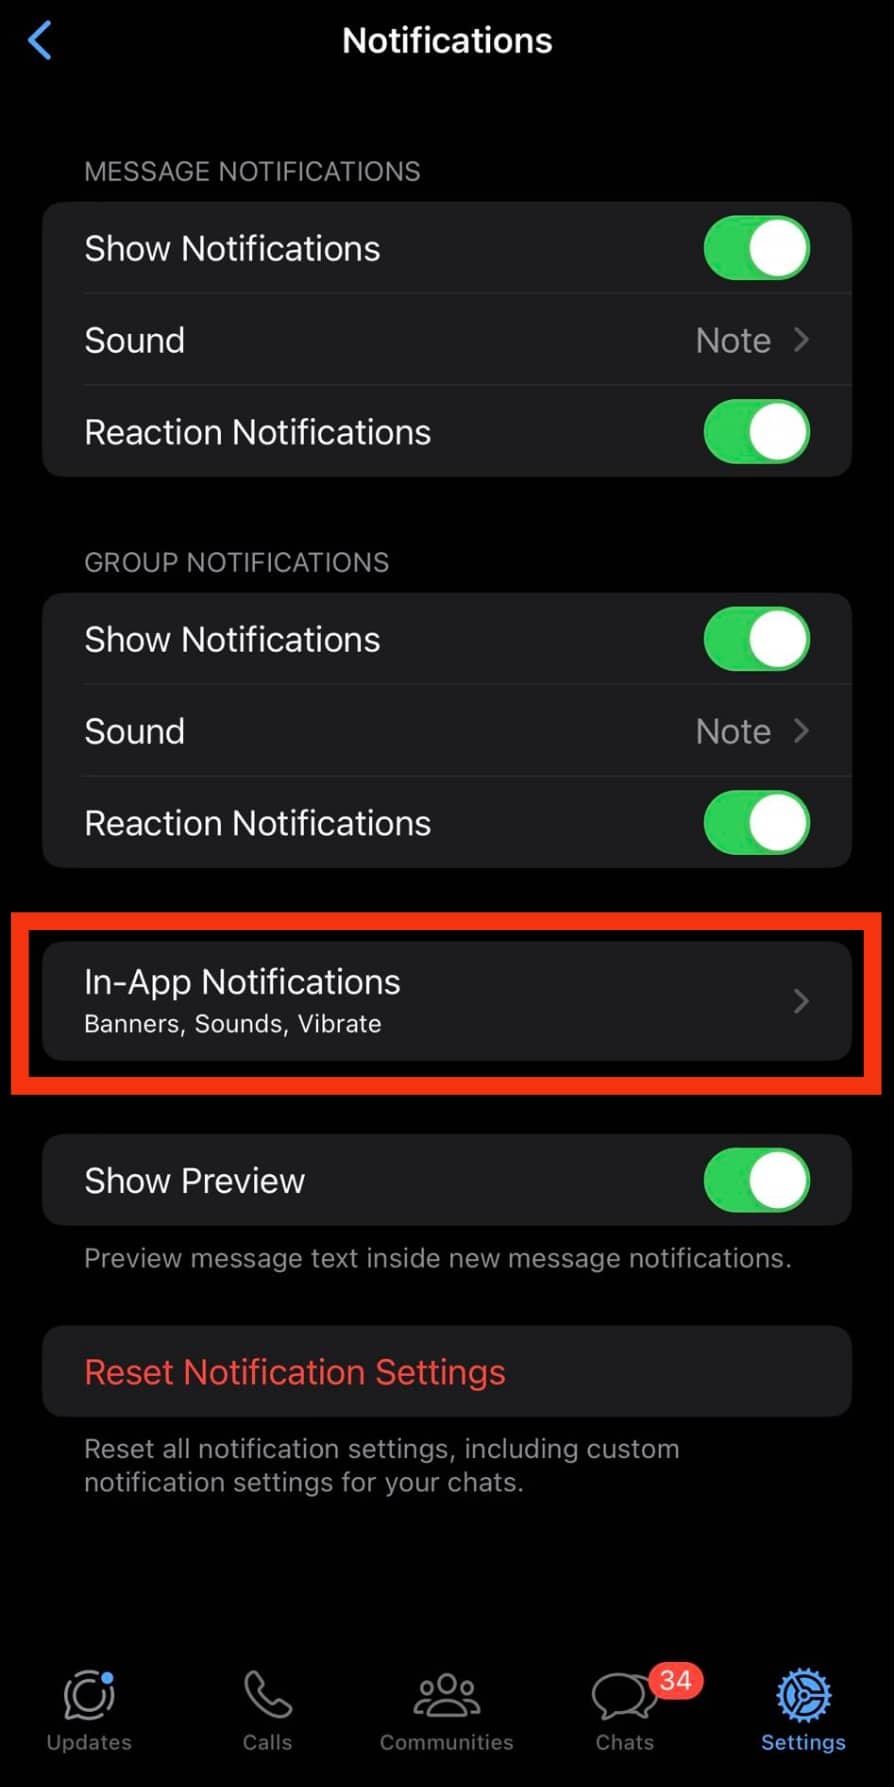 Tap On The In App Notifications Banner